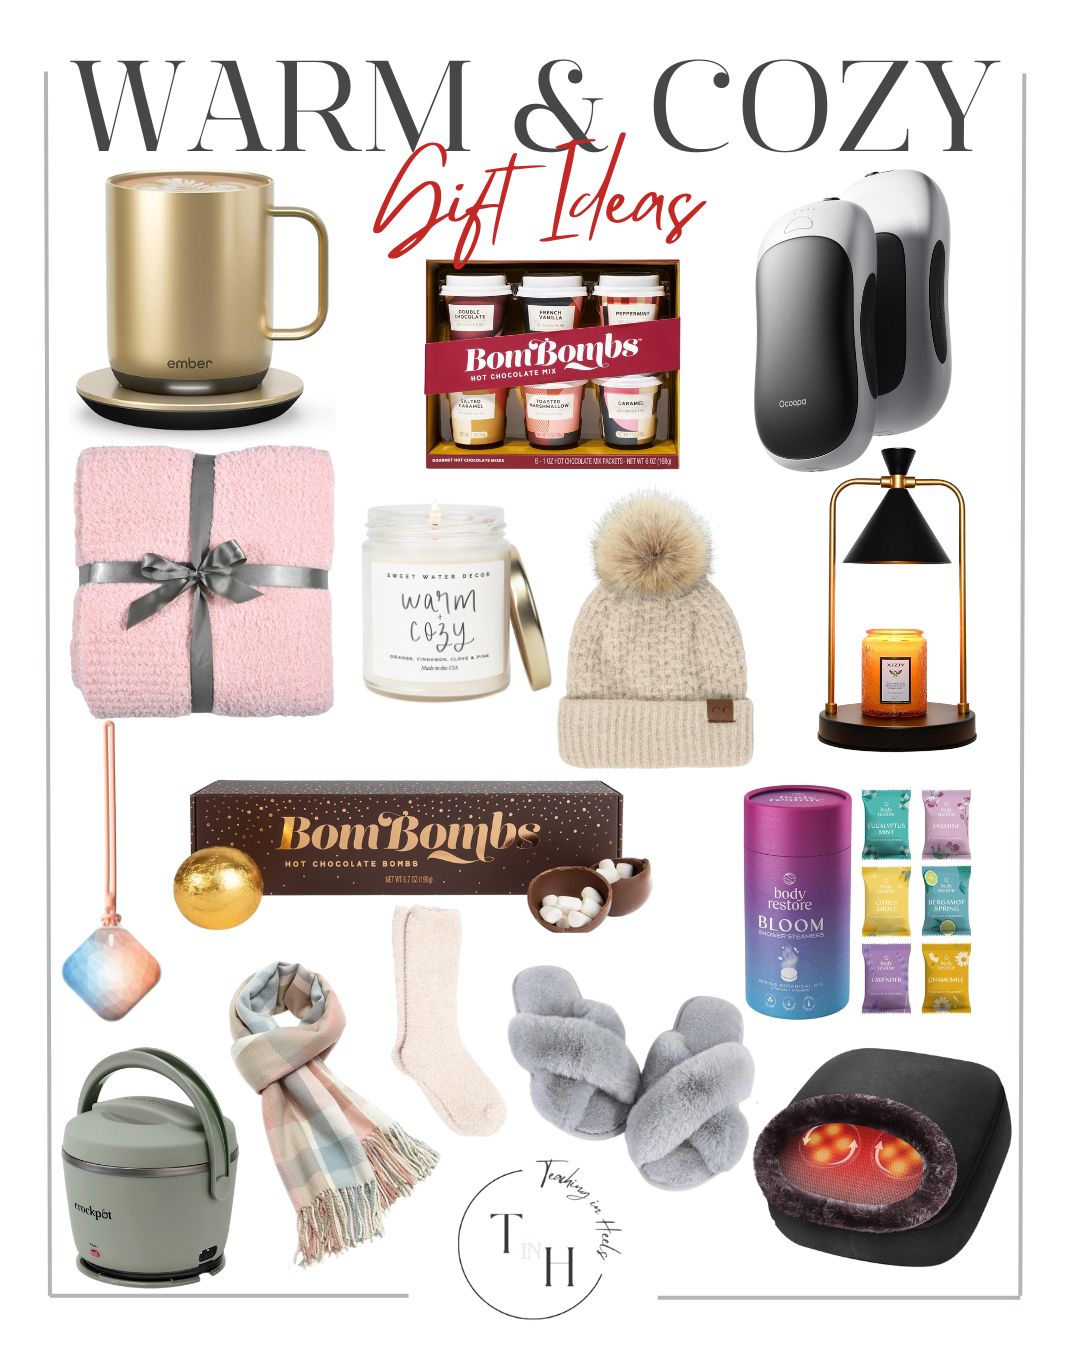 Warm and Cozy Gift Ideas #war, #cozy #gift #ideas #printable #gift #tags #Shop #Bus 